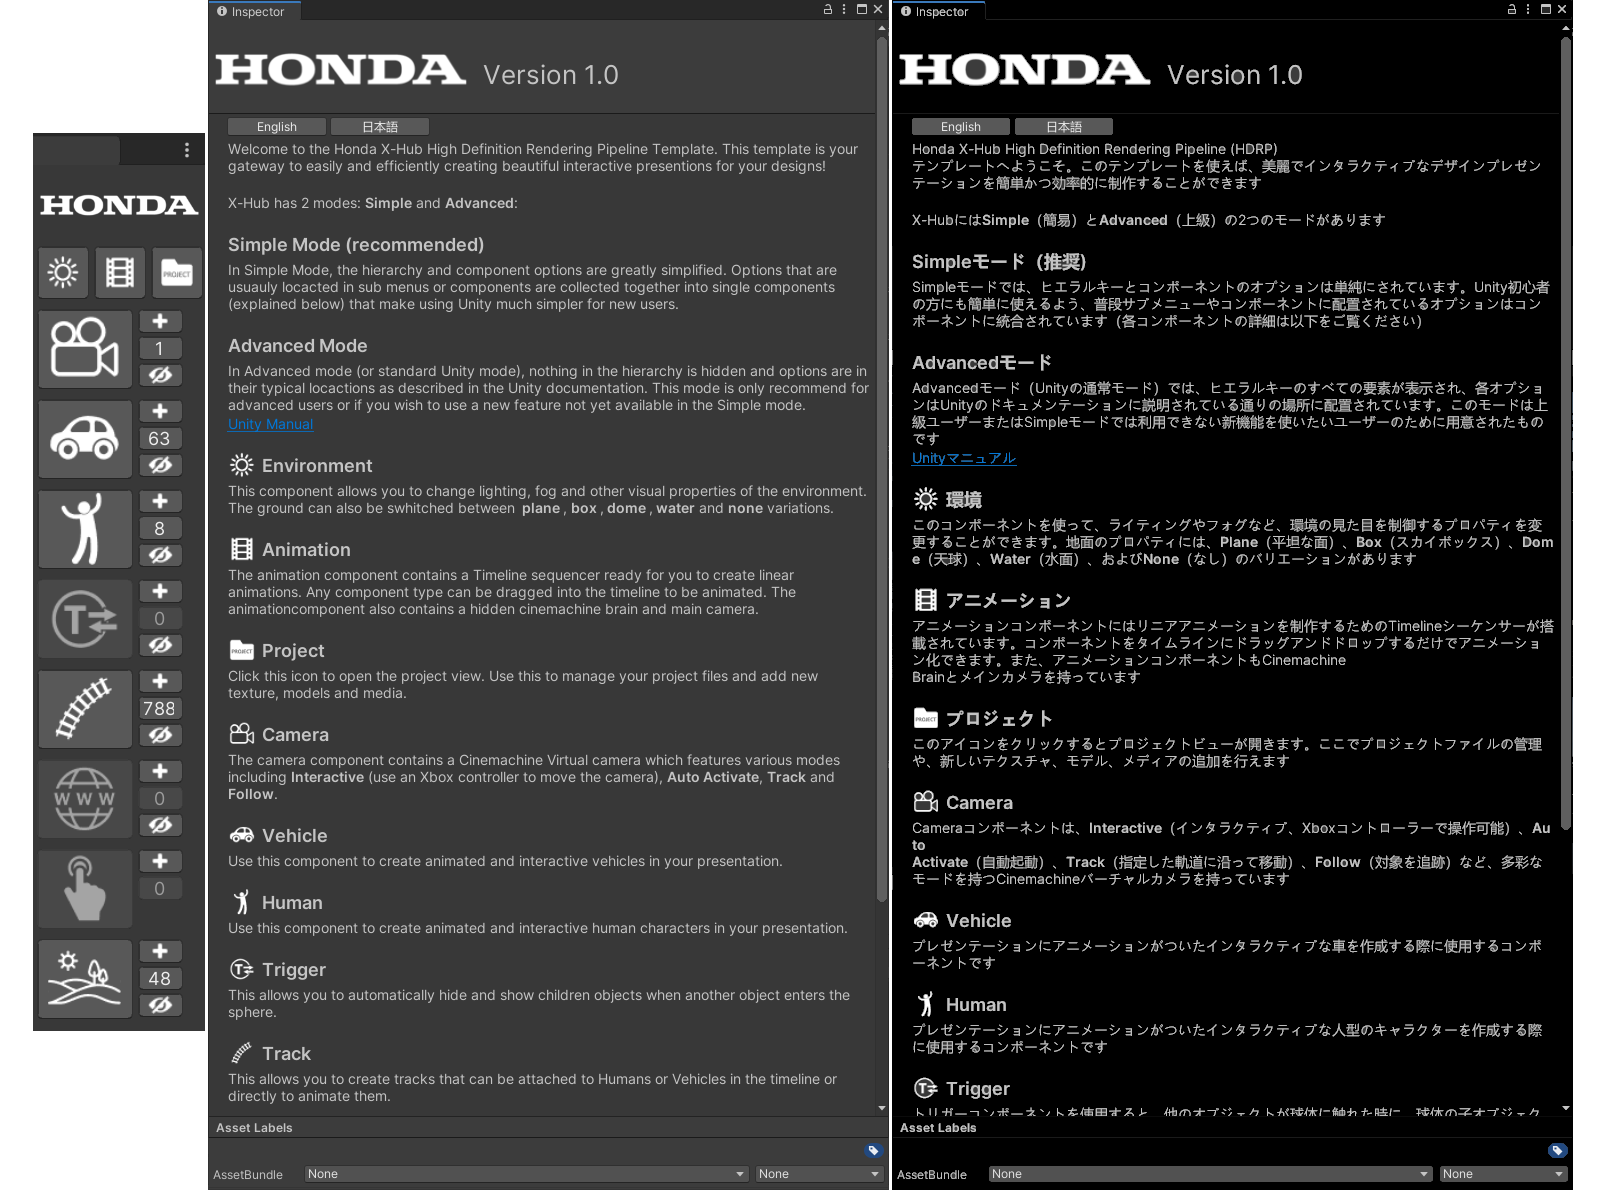 Simple Mode activates a simplified UI for accessing custom components for Honda’s designers